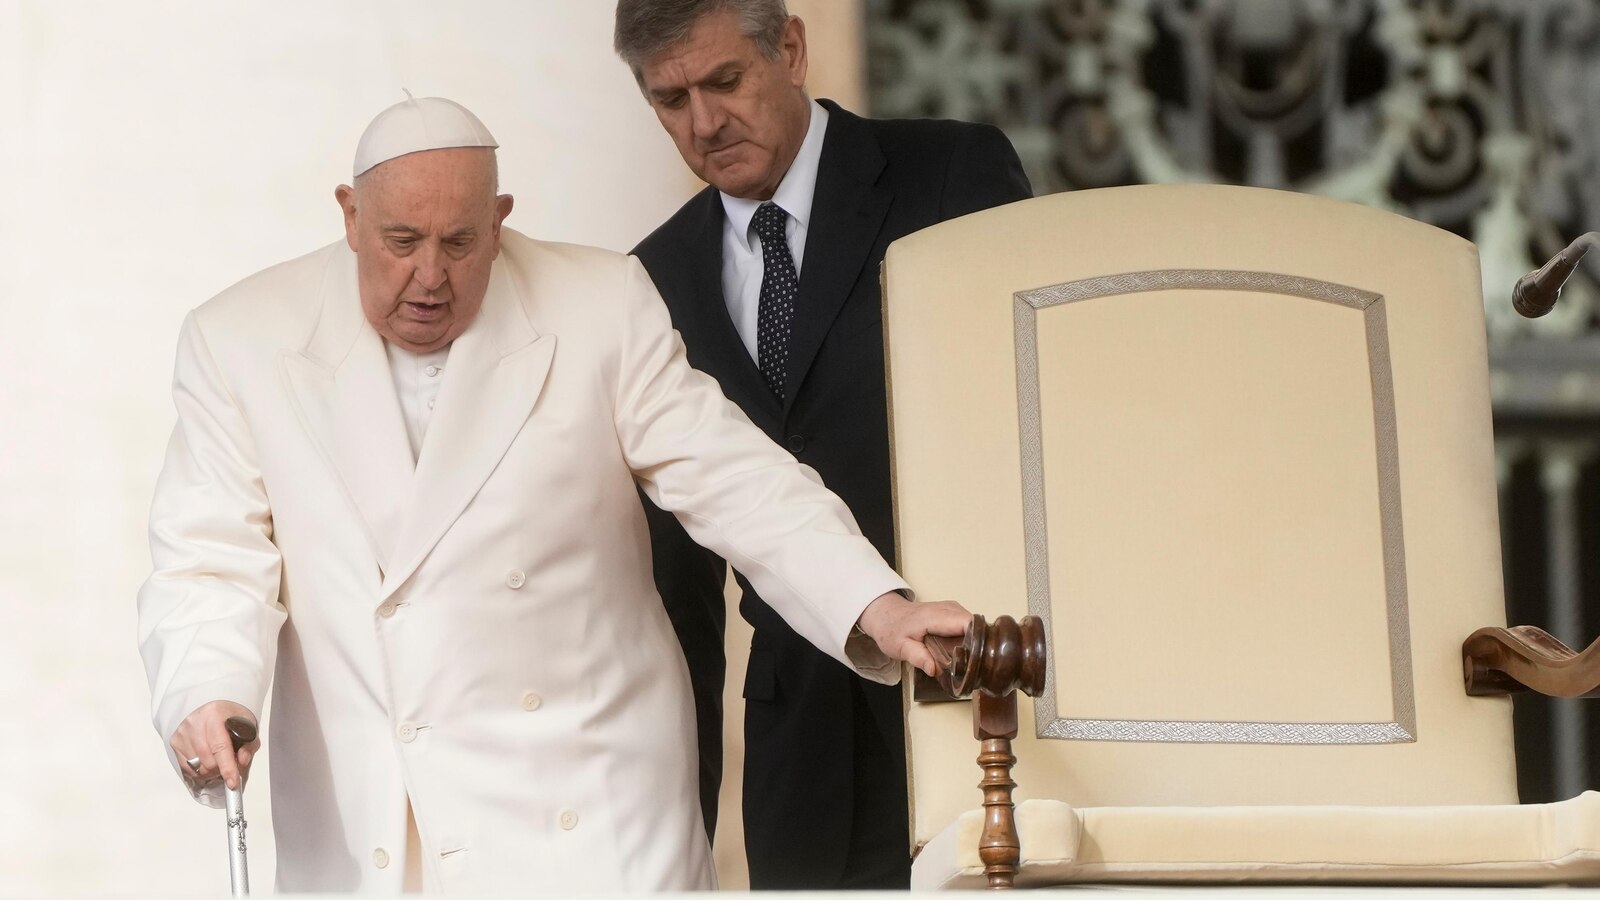 Pope's Health Concerns Impact Ability to Climb Steps due to Respiratory and Mobility Issues